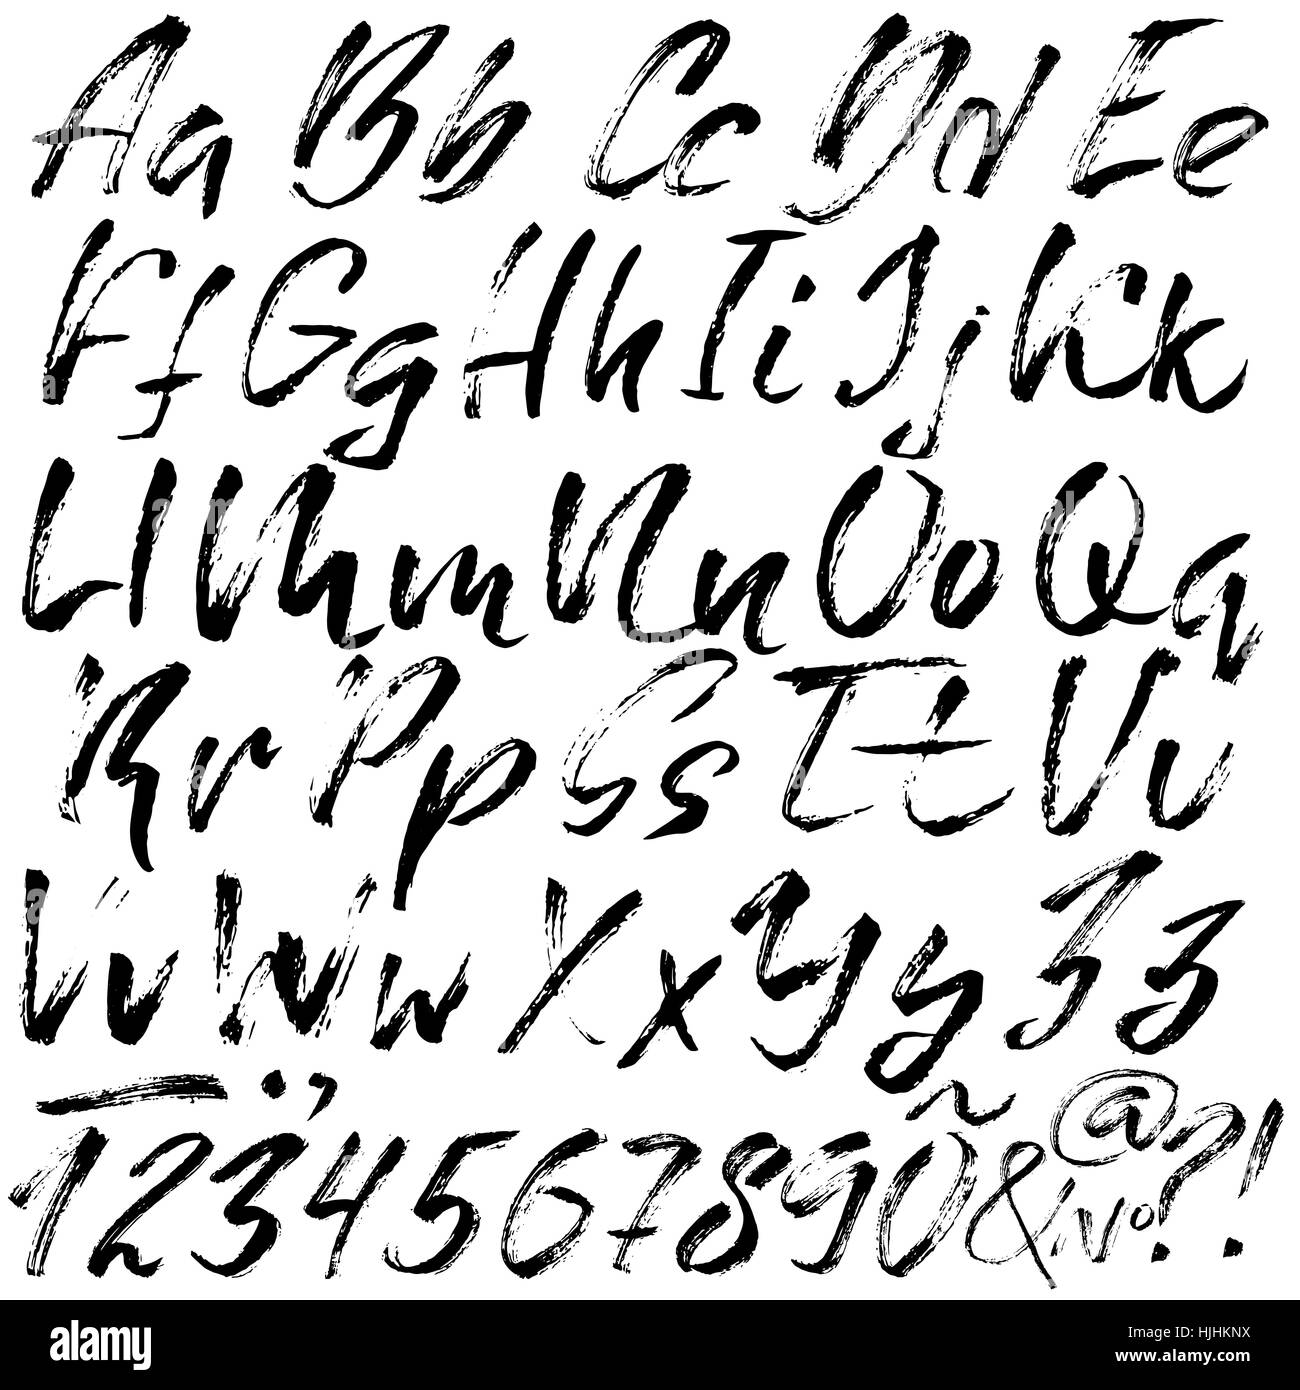 Hand drawn font made by dry brush strokes. Grunge style alphabet ...